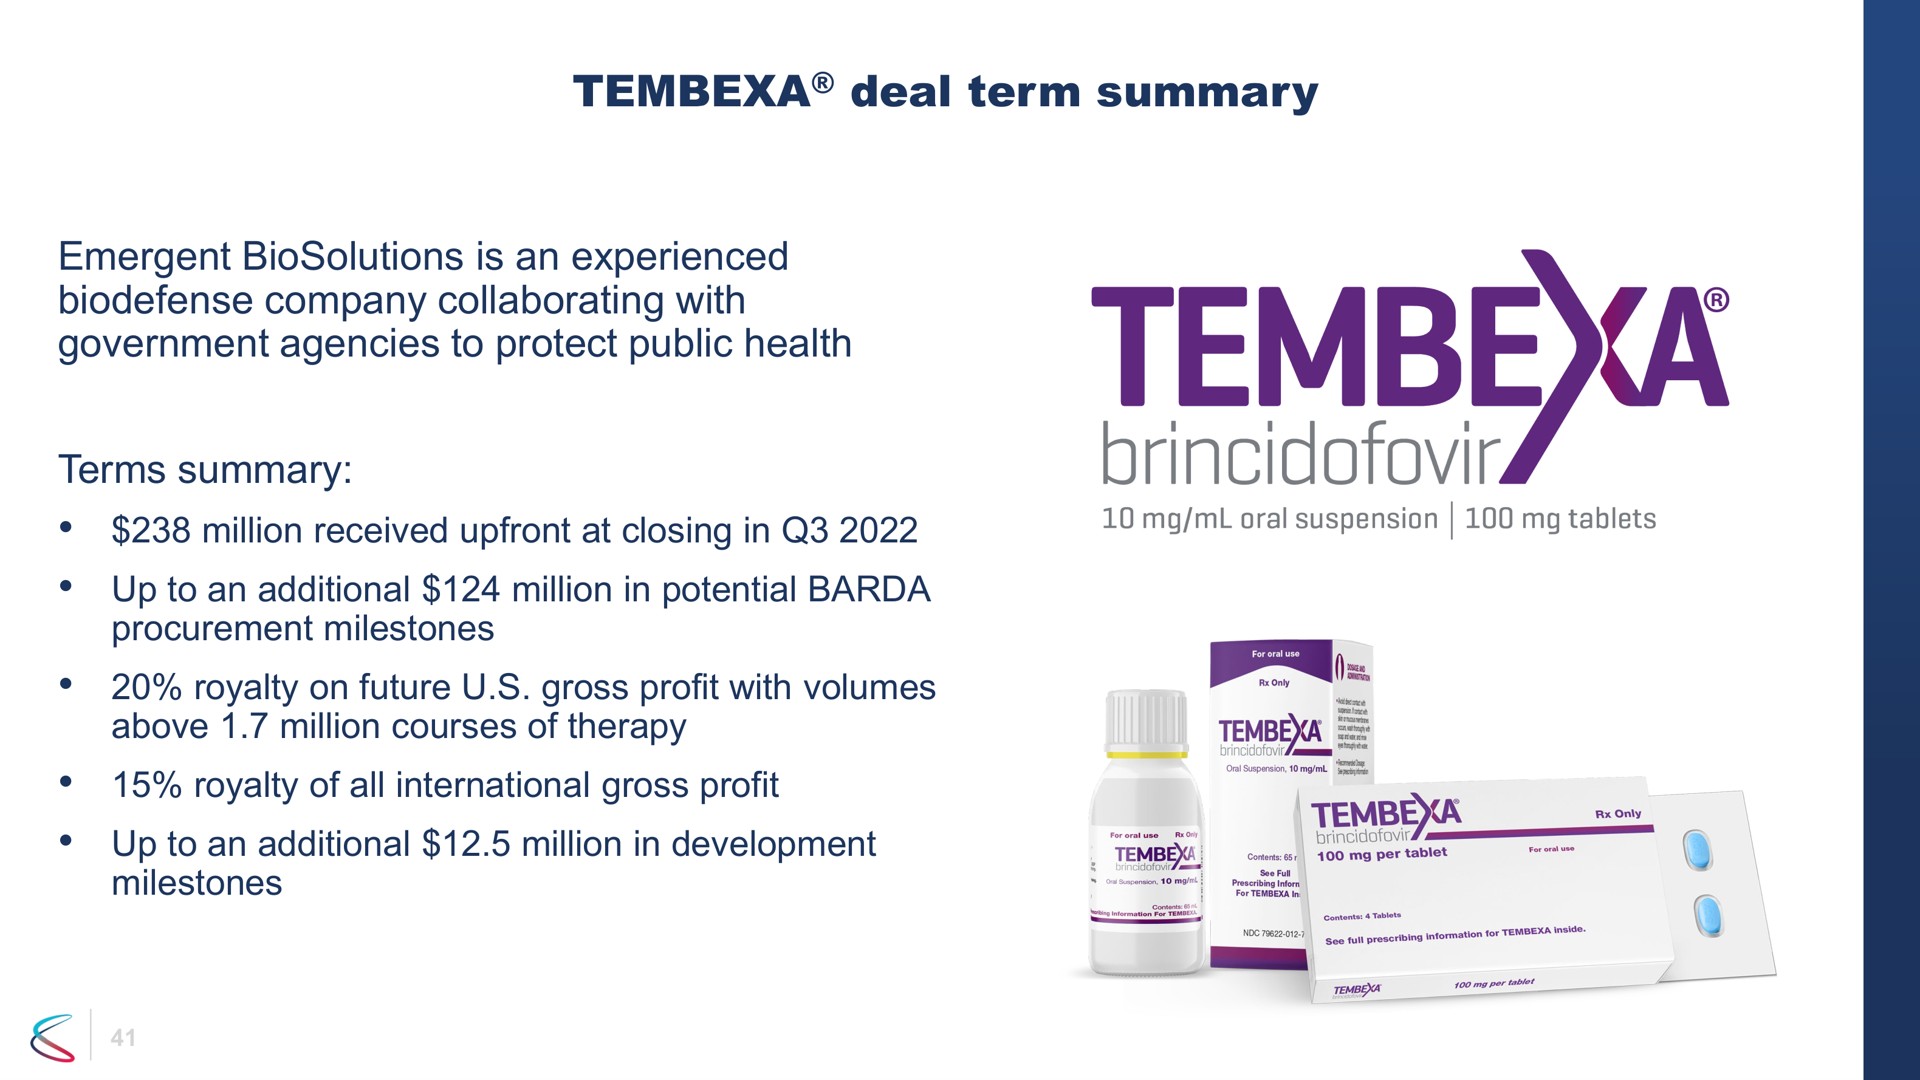 deal term summary emergent is an experienced company collaborating with government agencies to protect public health terms summary million received at closing in up to an additional million in potential procurement milestones royalty on future gross profit with volumes above million courses of therapy royalty of all international gross profit up to an additional million in development milestones a oral suspension tablets tembe me | Chimerix